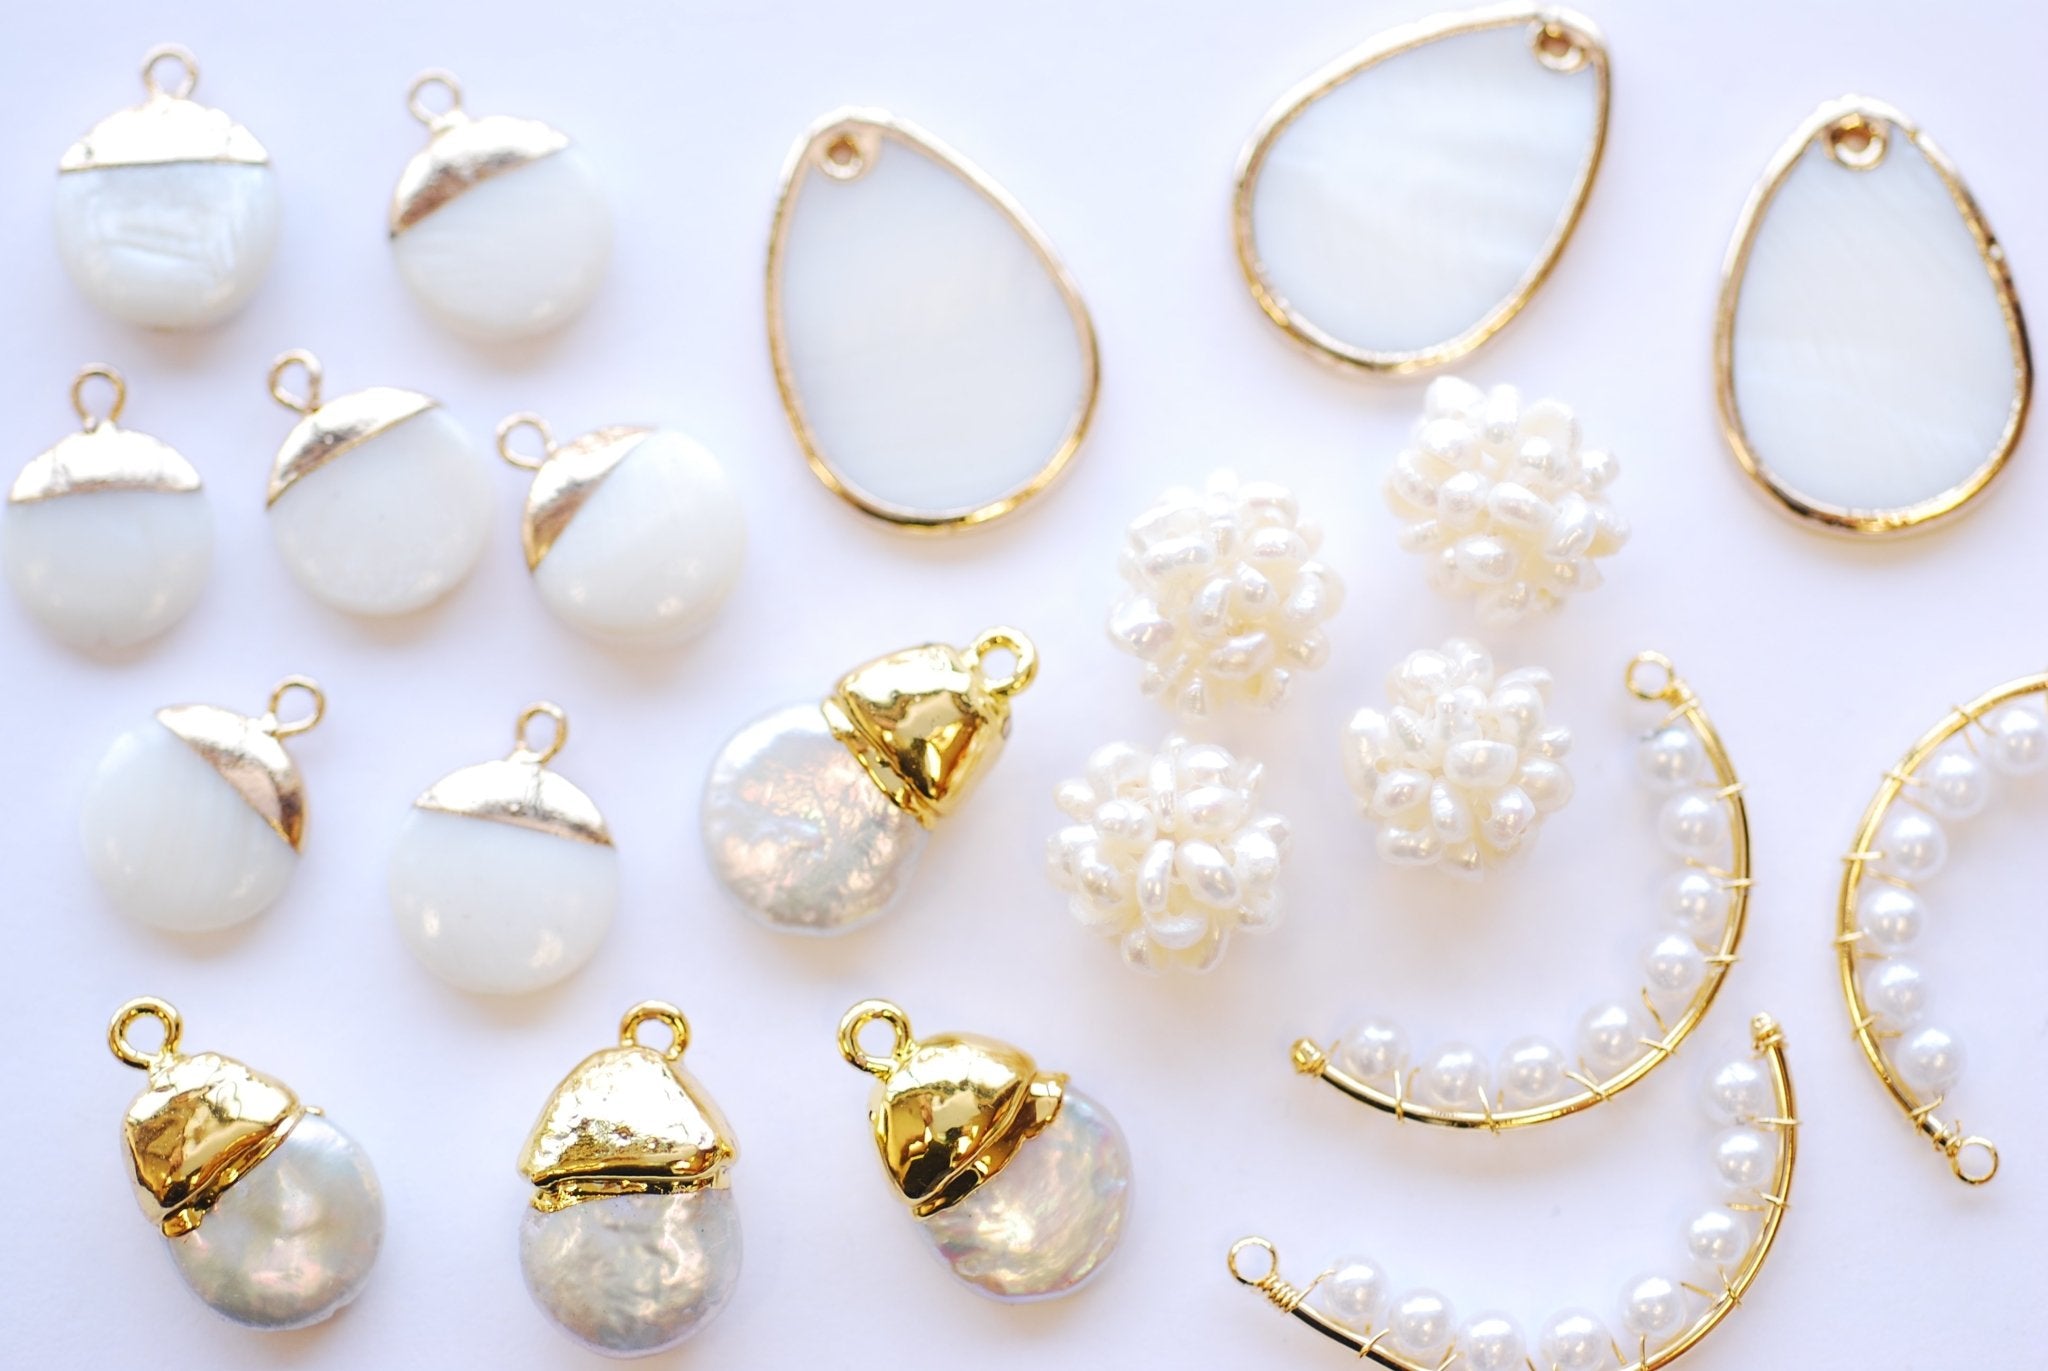 Wholesale Precious Stones & Pearls | Electroplated | HarperCrown